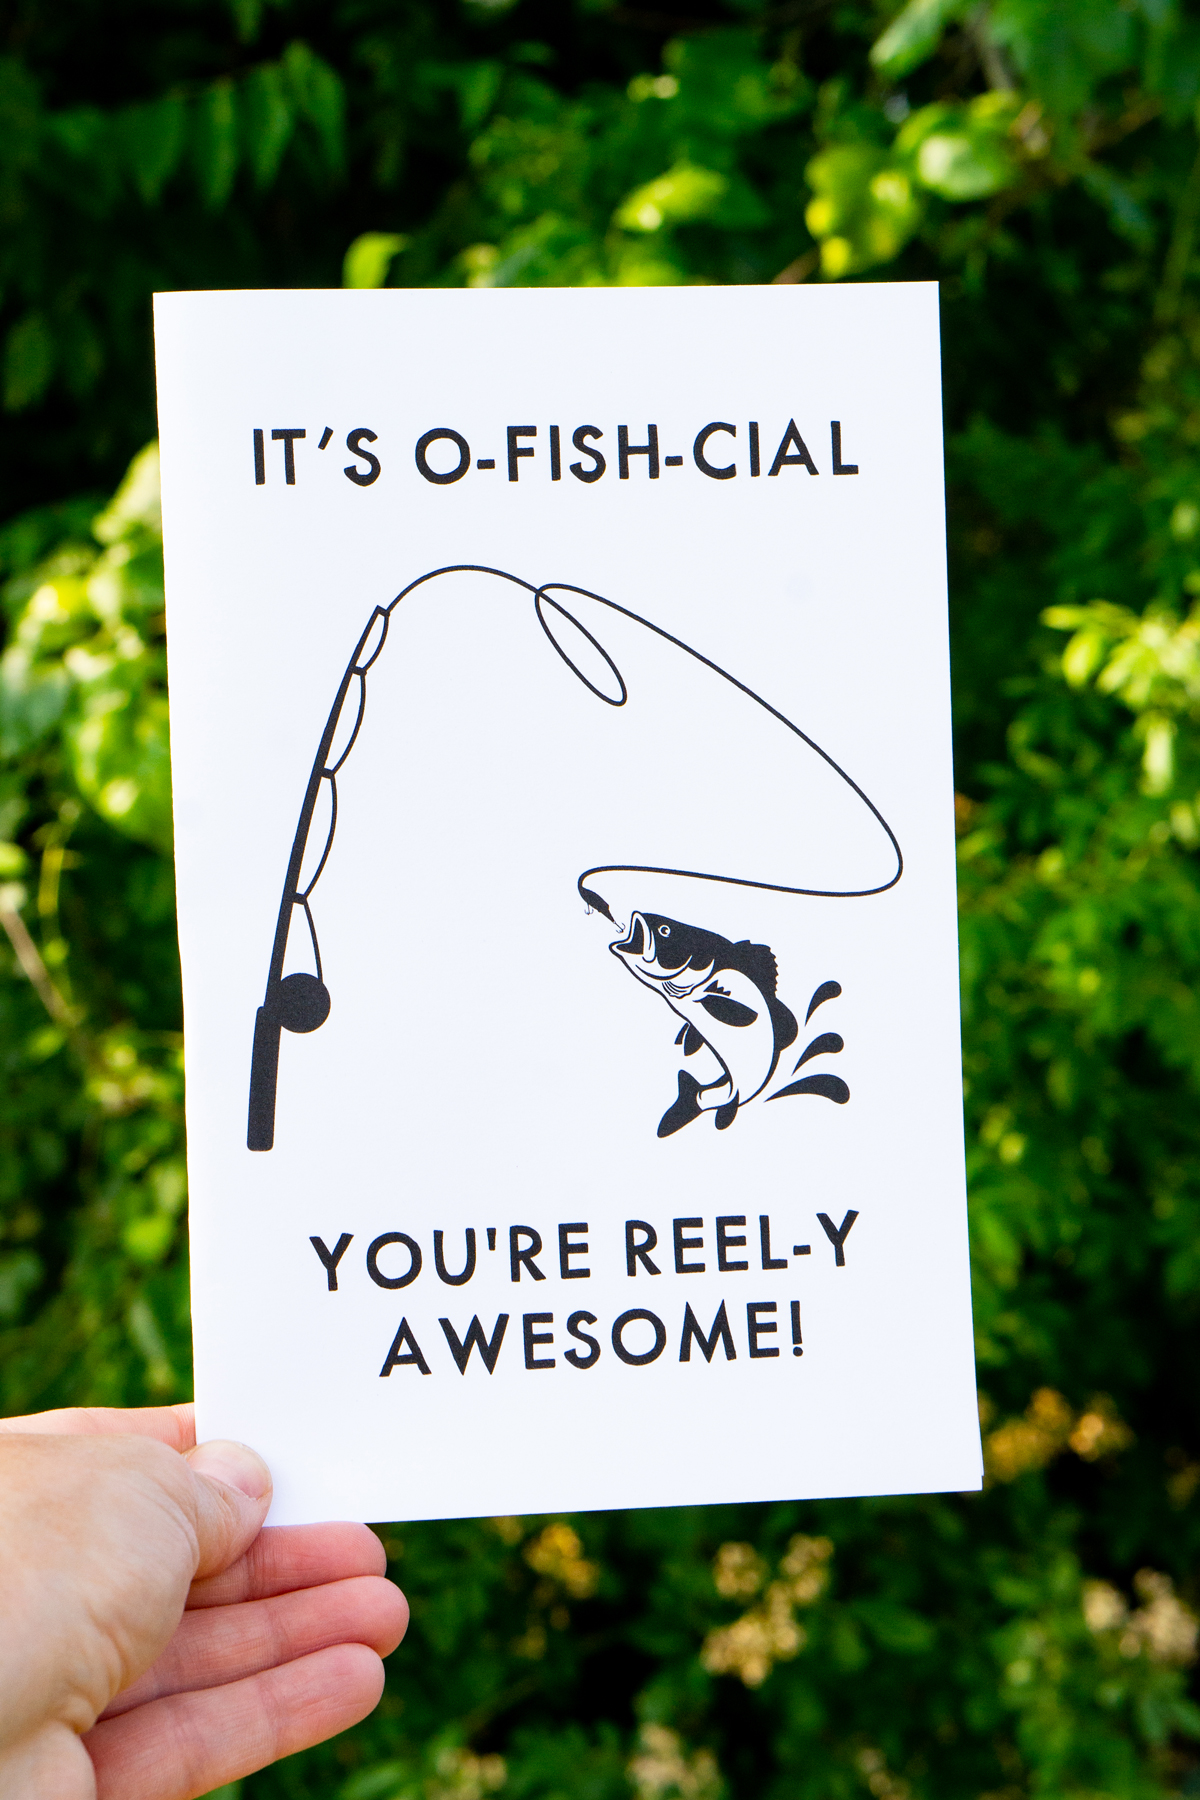 This card says, "It's o-fish-cial you’re reel-y awesome! It has a fish and fishing pole.